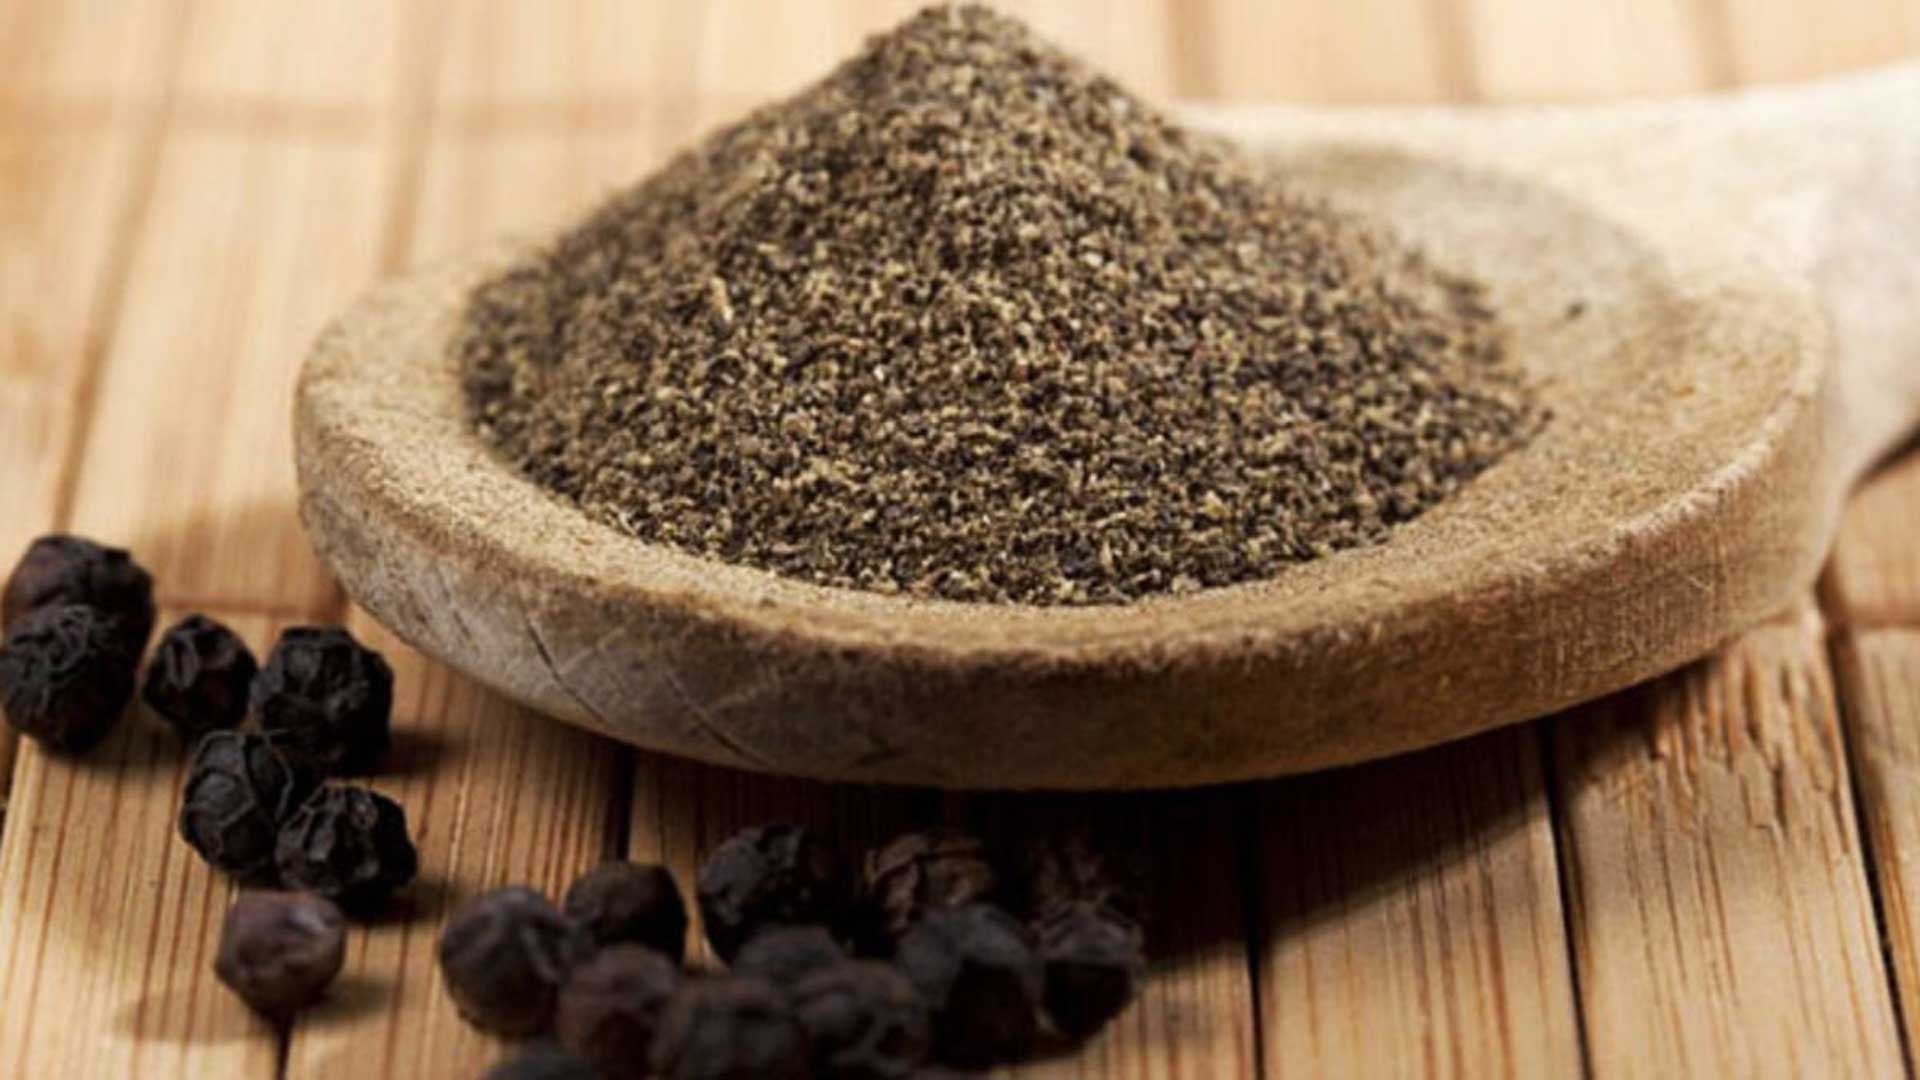 About Black Pepper